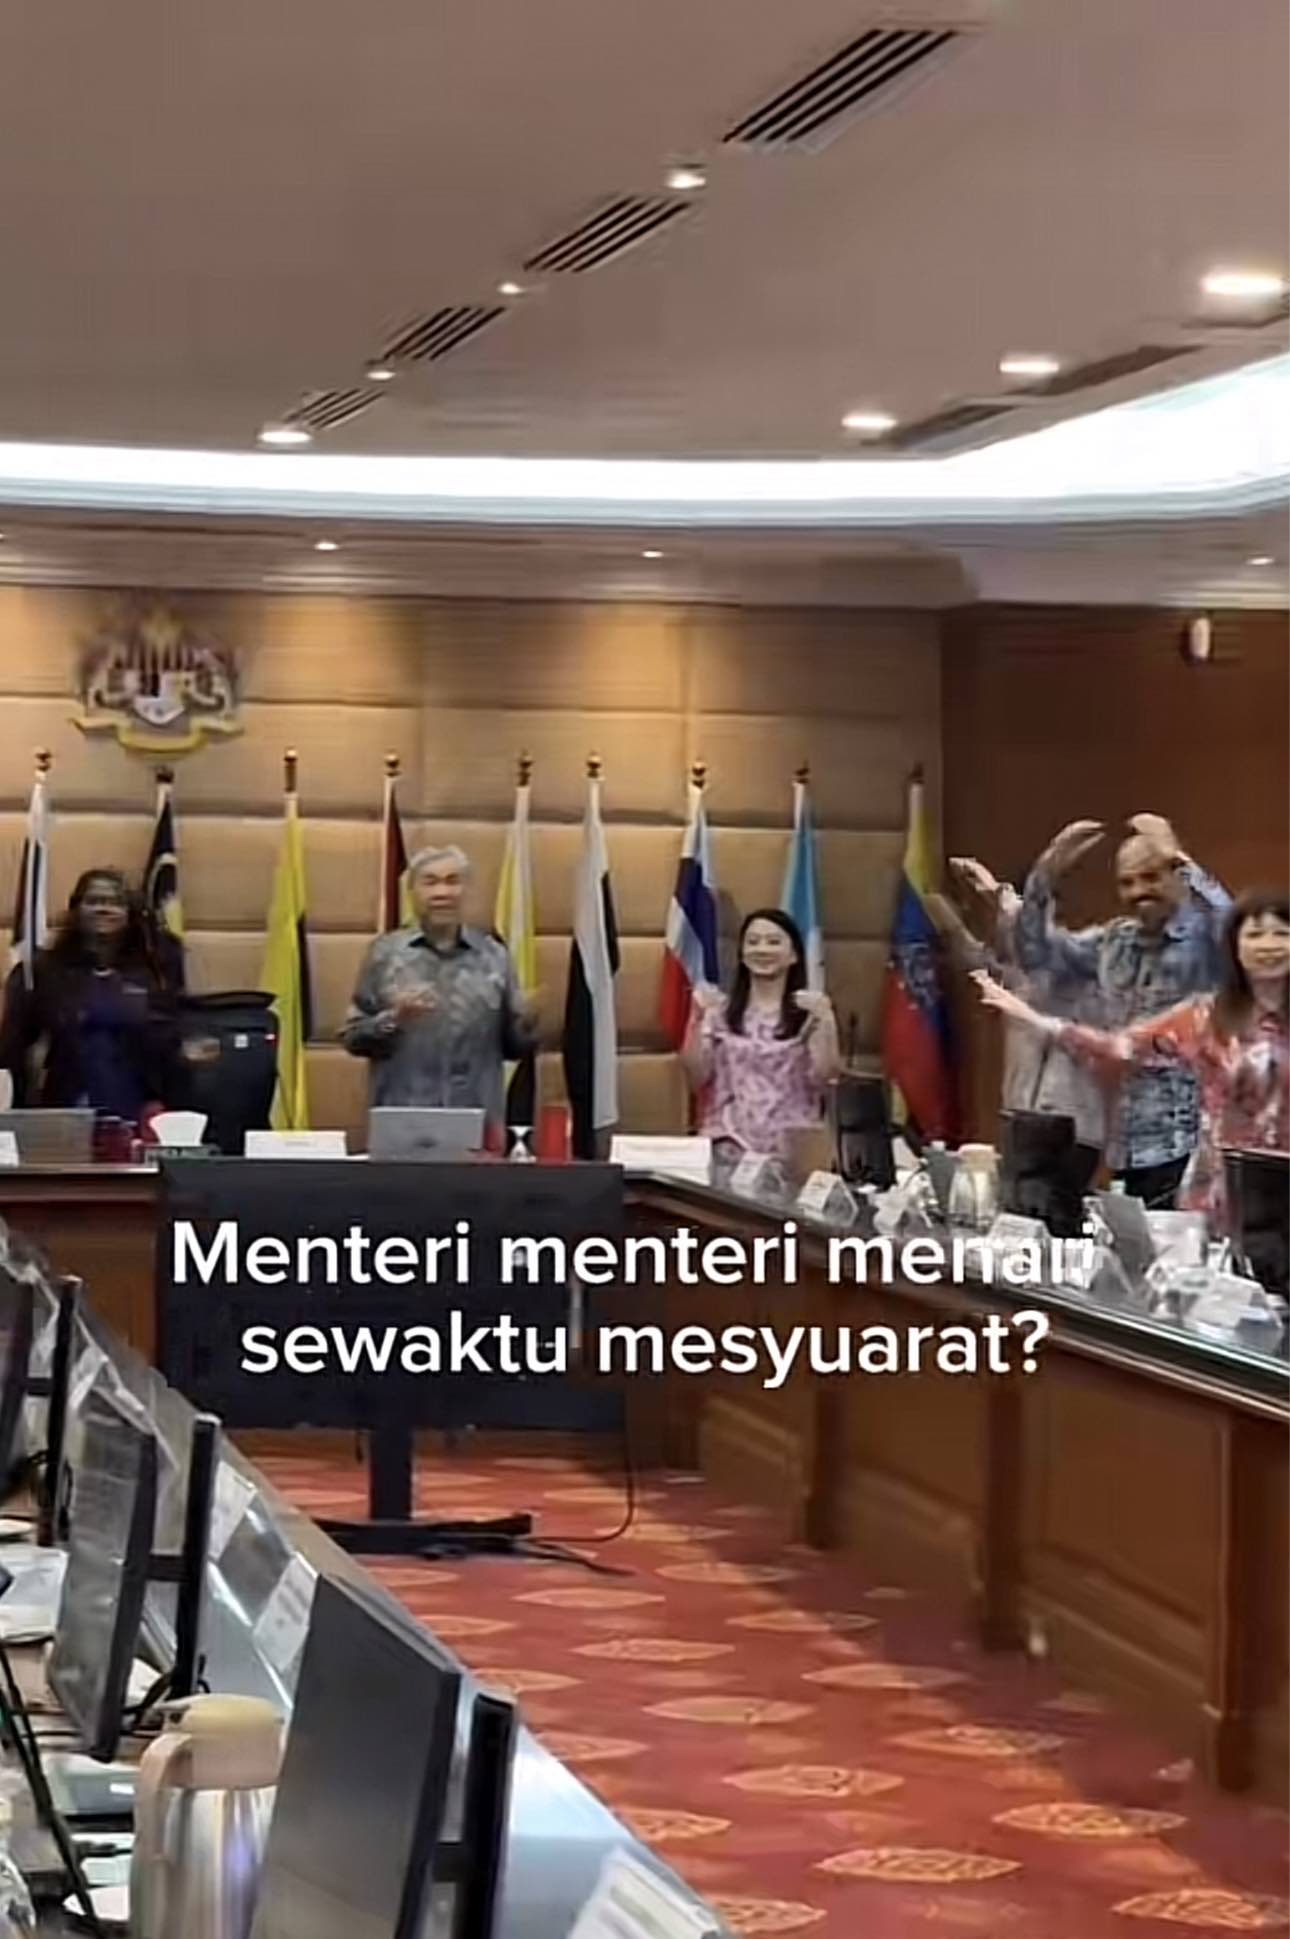 Ministers dancing during meeting